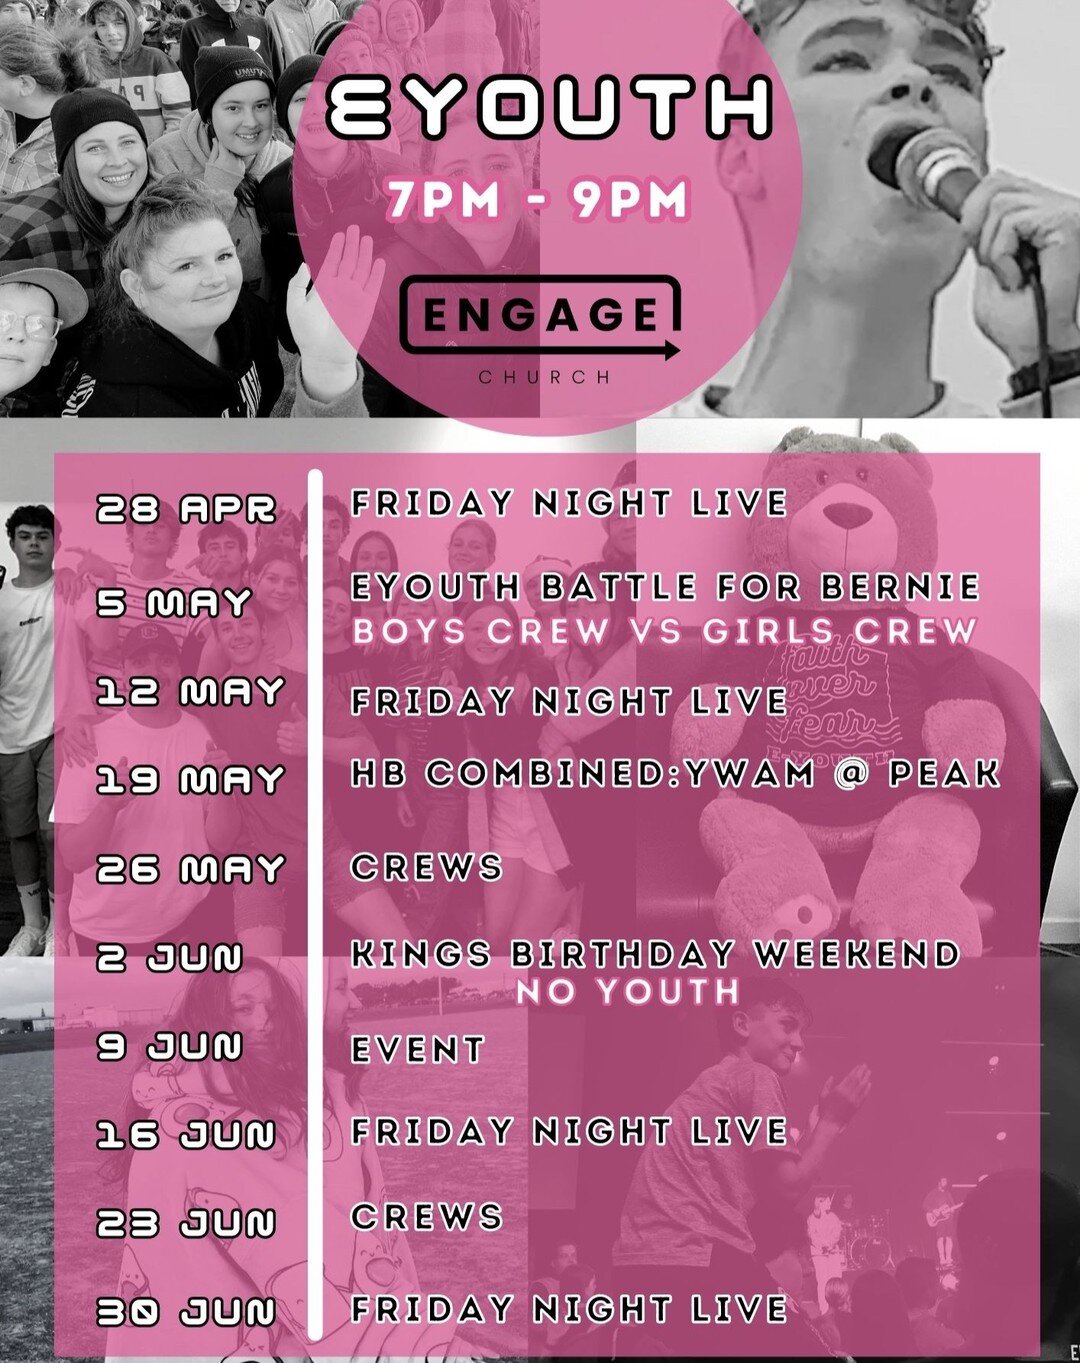 term 2 incoming..... and we're pumped !! 🎉 get at us in the dm if you're keen to bring a Mini-preach at FNL 👀👀